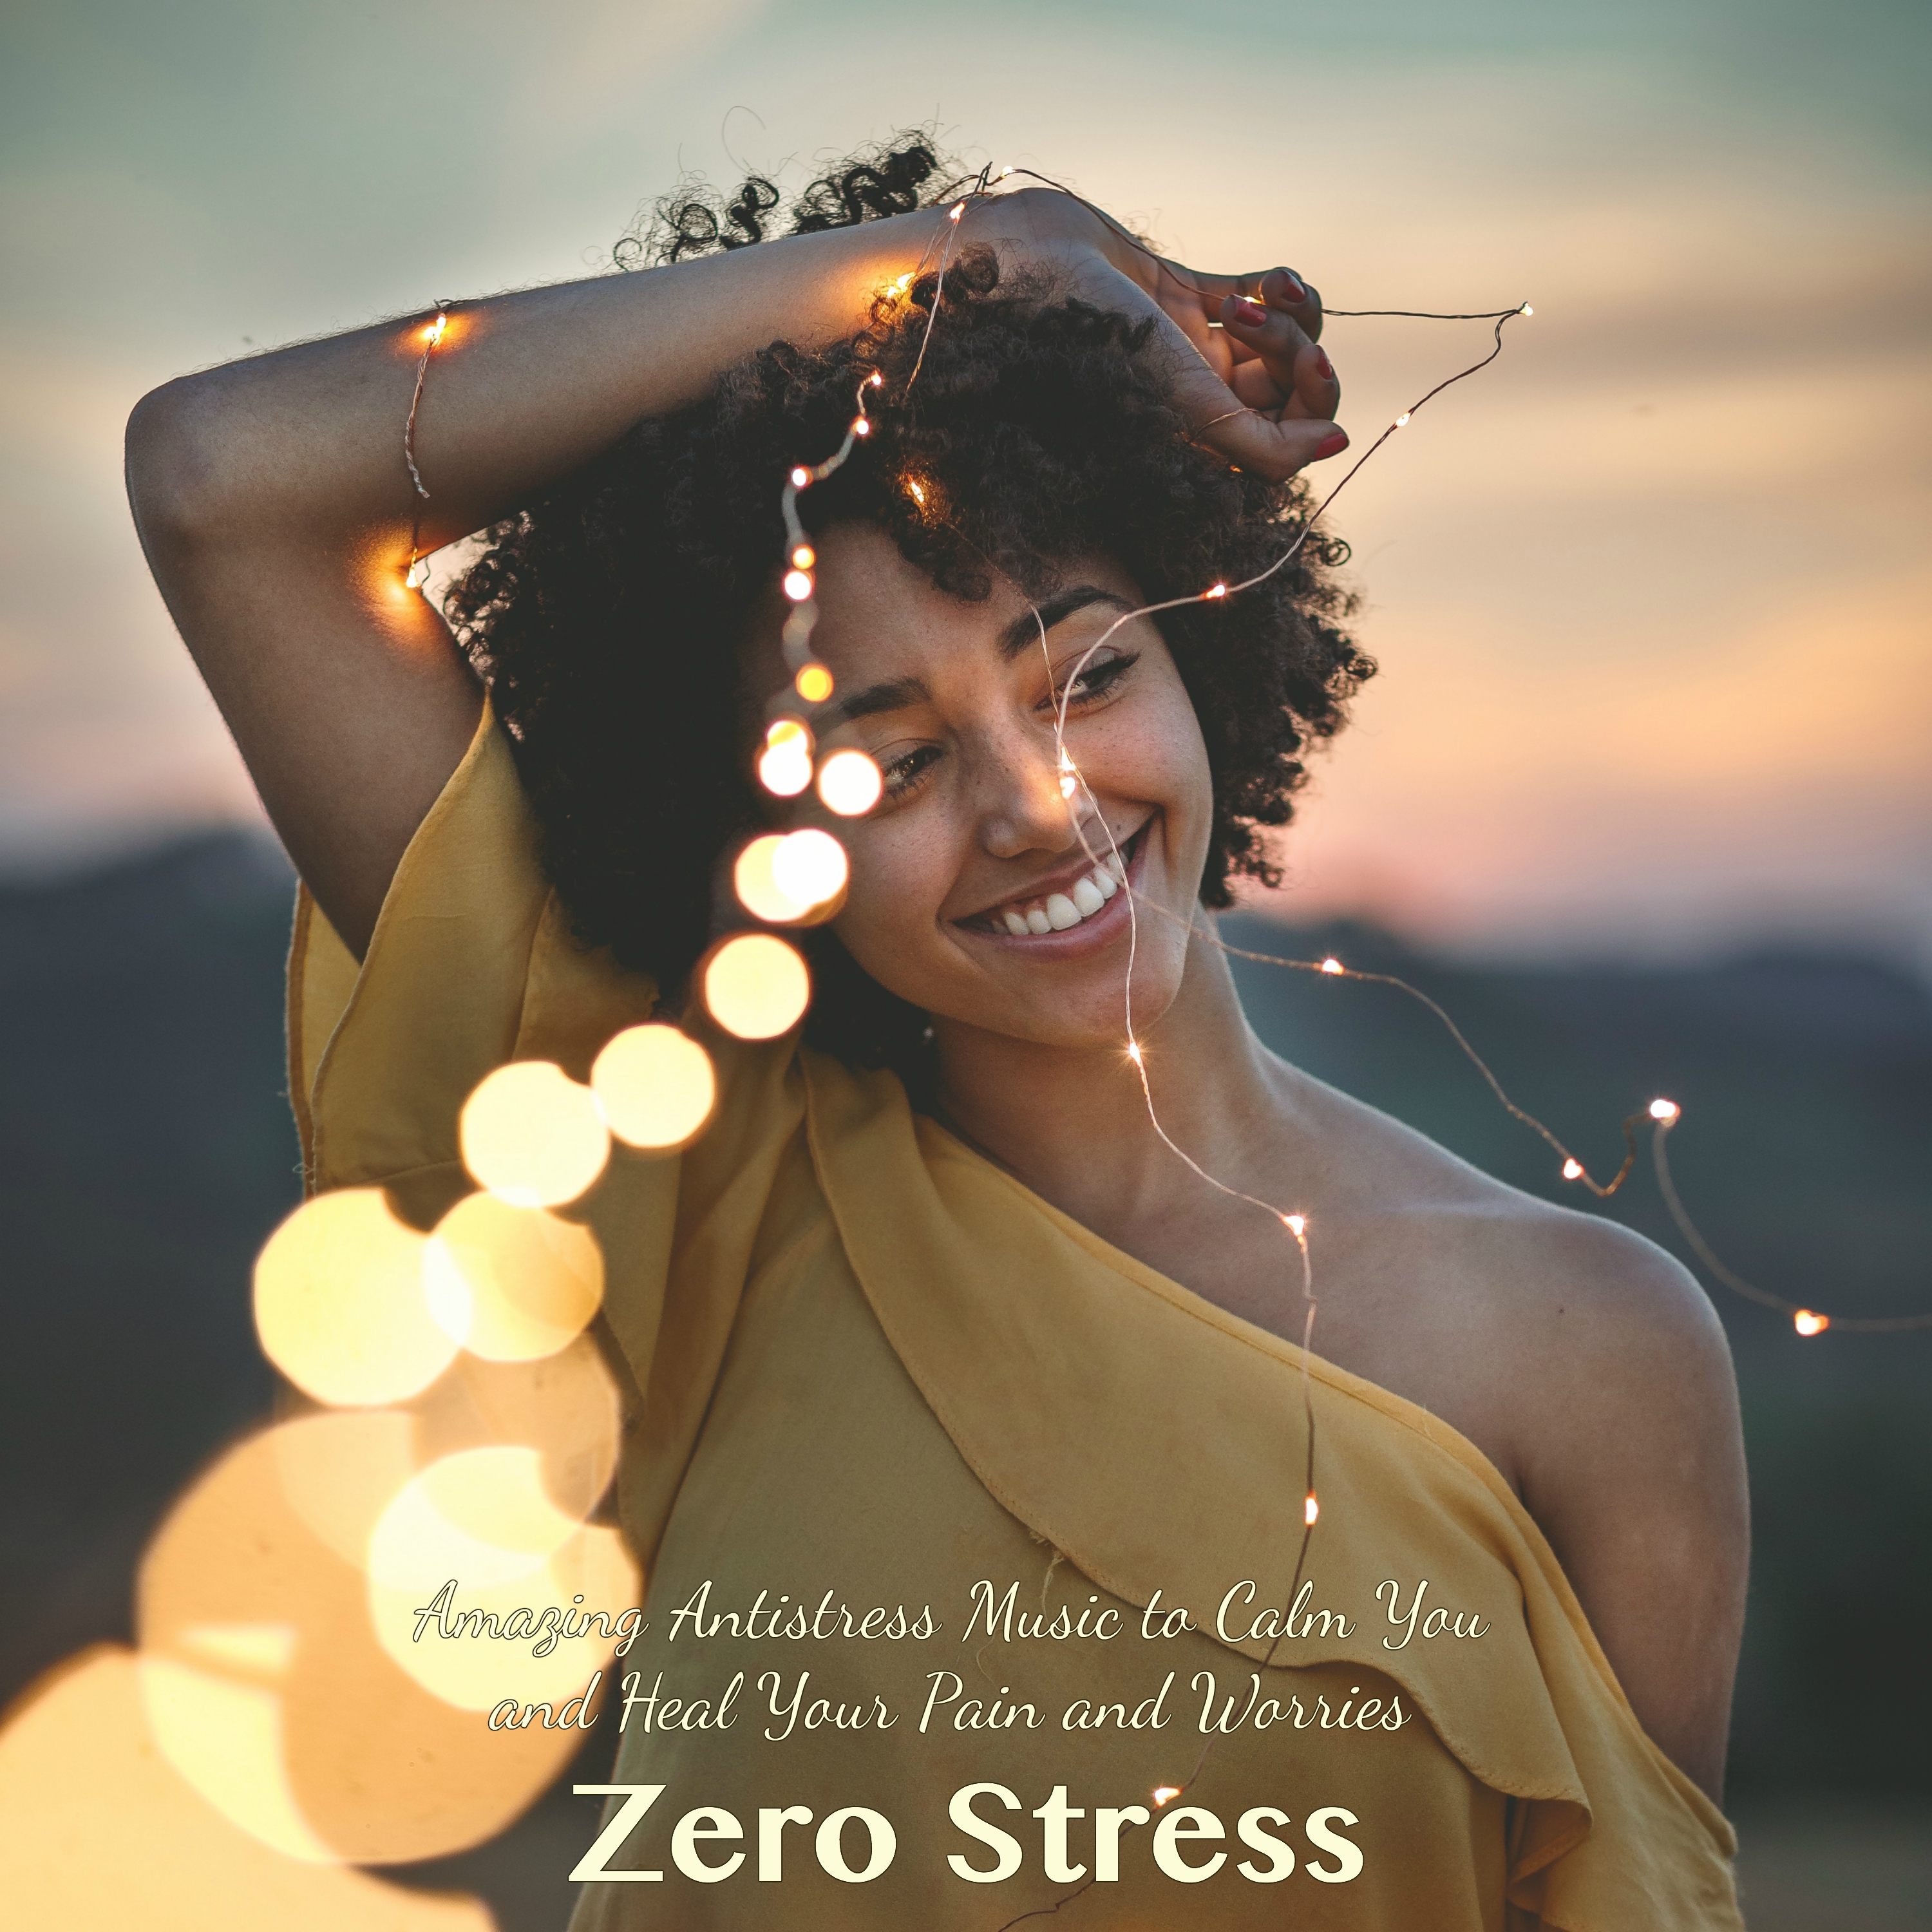 Zero Stress  Amazing Antistress Music to Calm You and Heal Your Pain and Worries